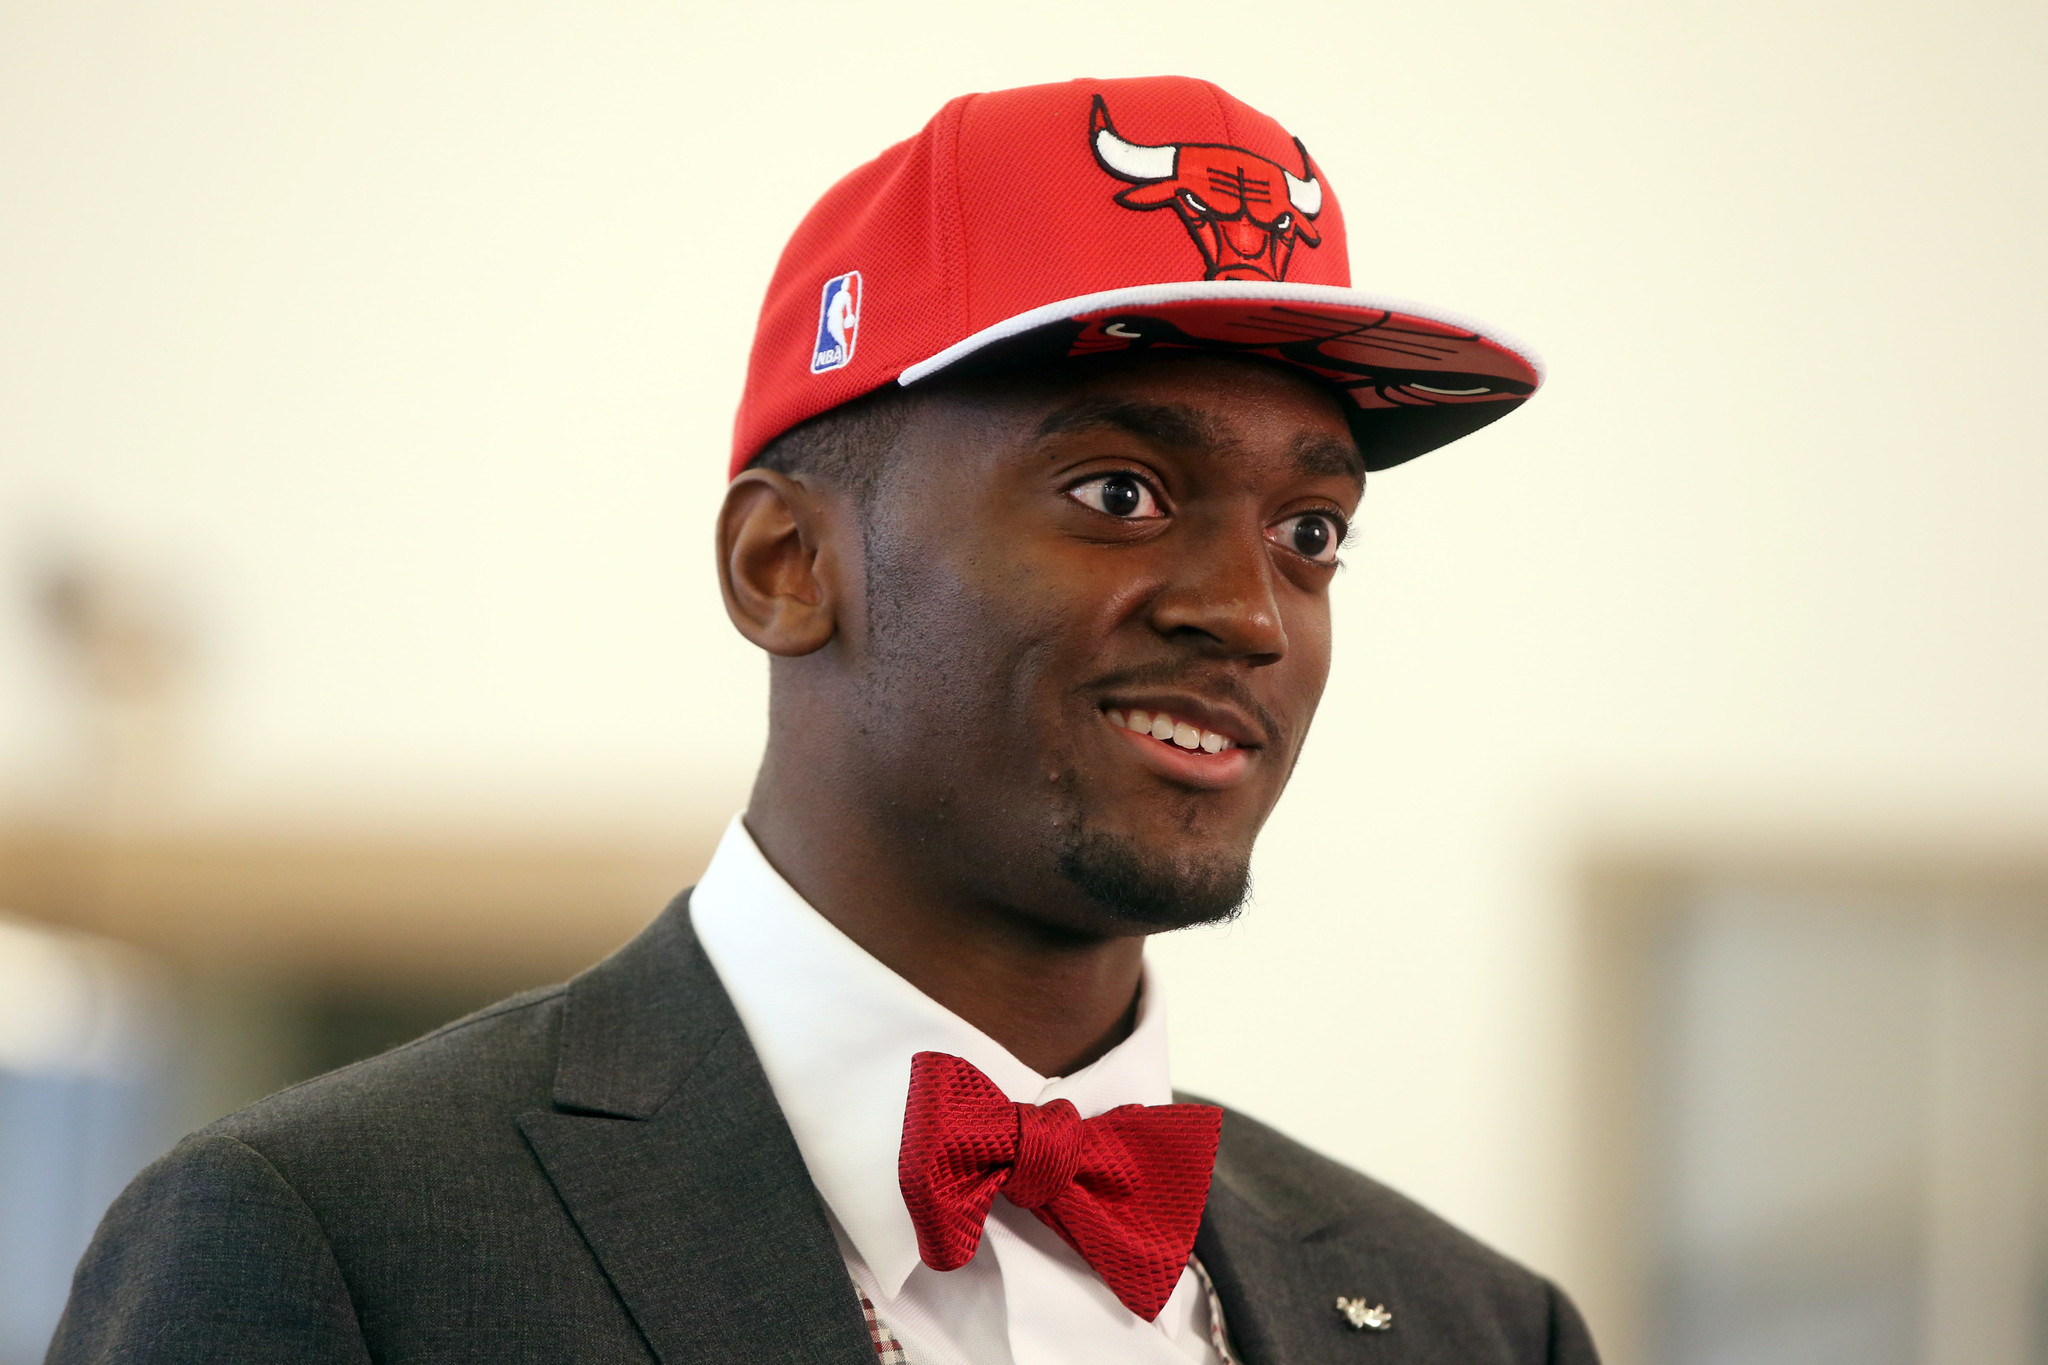 Bulls rookie Bobby Portis plays his role, waits for his ...